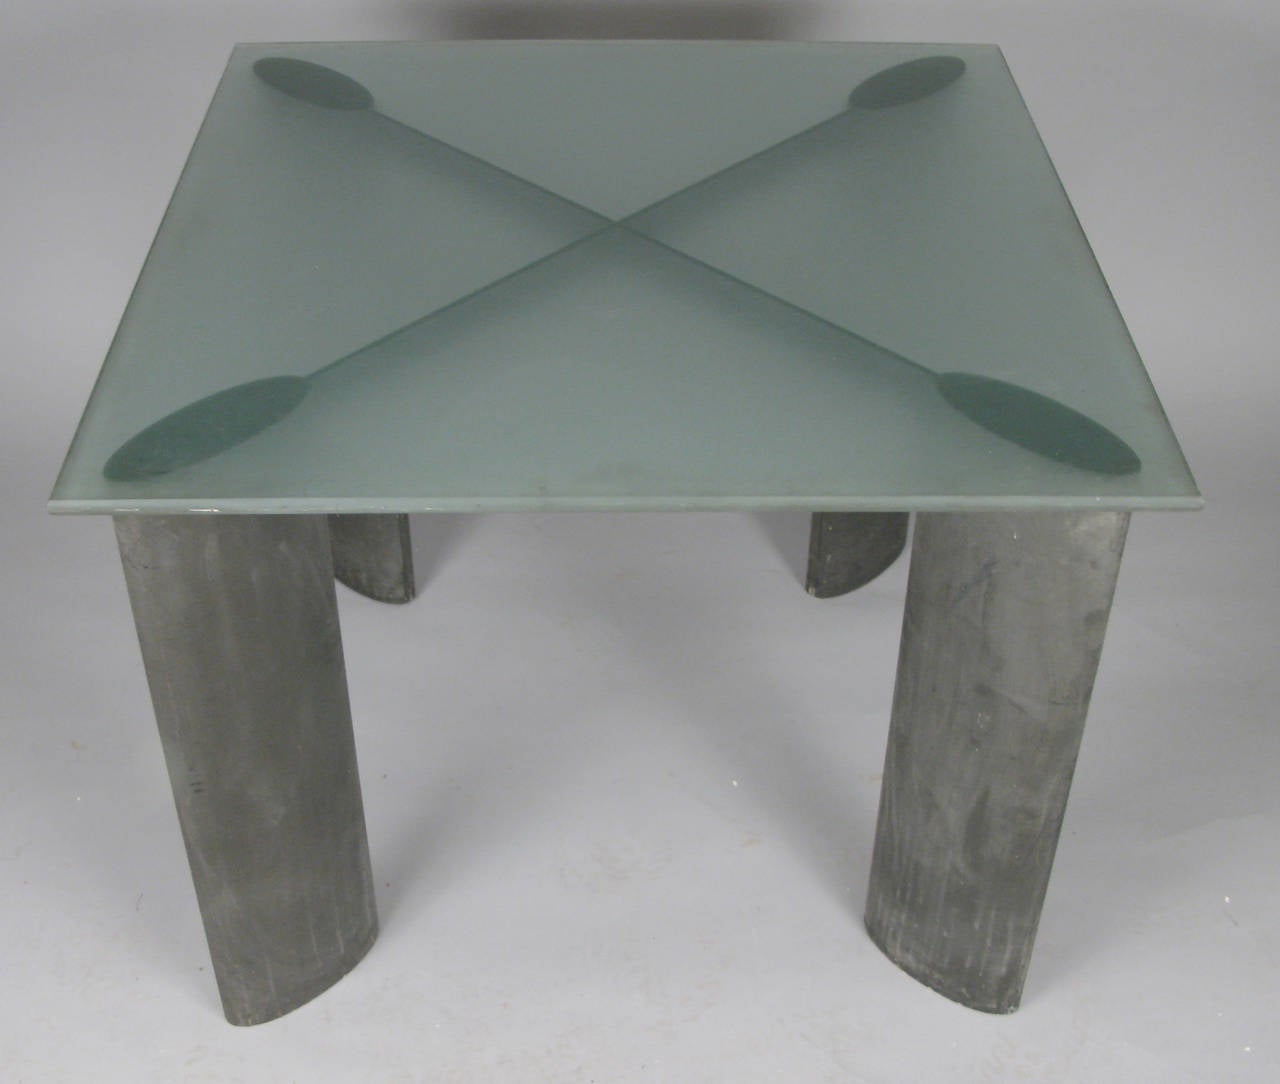 A modern 1980s table designed by architect Piotr Sierakowski for Koch & Lowy. Glass top is sandblasted on one side and polished on the other, with sandblasted edges. extruded aluminum base in its original dark grey finish.